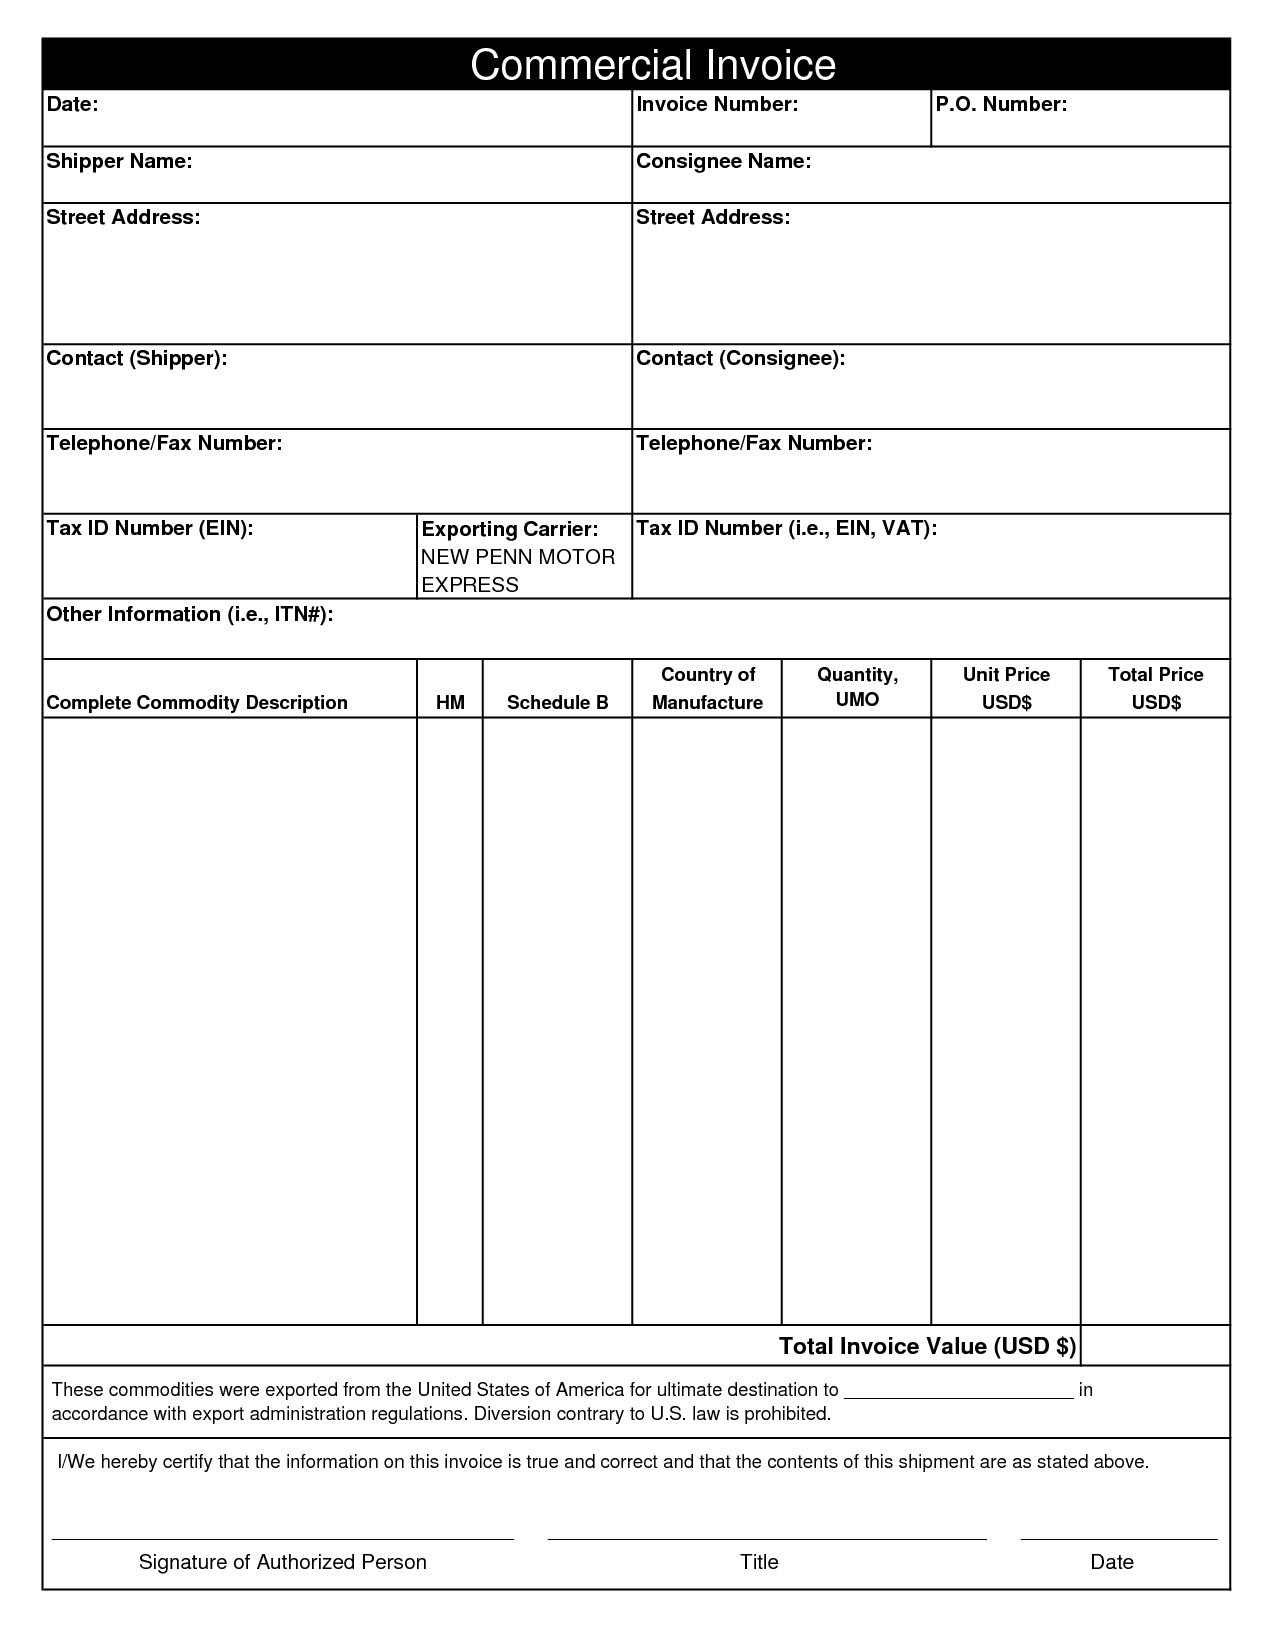 free commercial invoice template invoice template commercial invoice template free